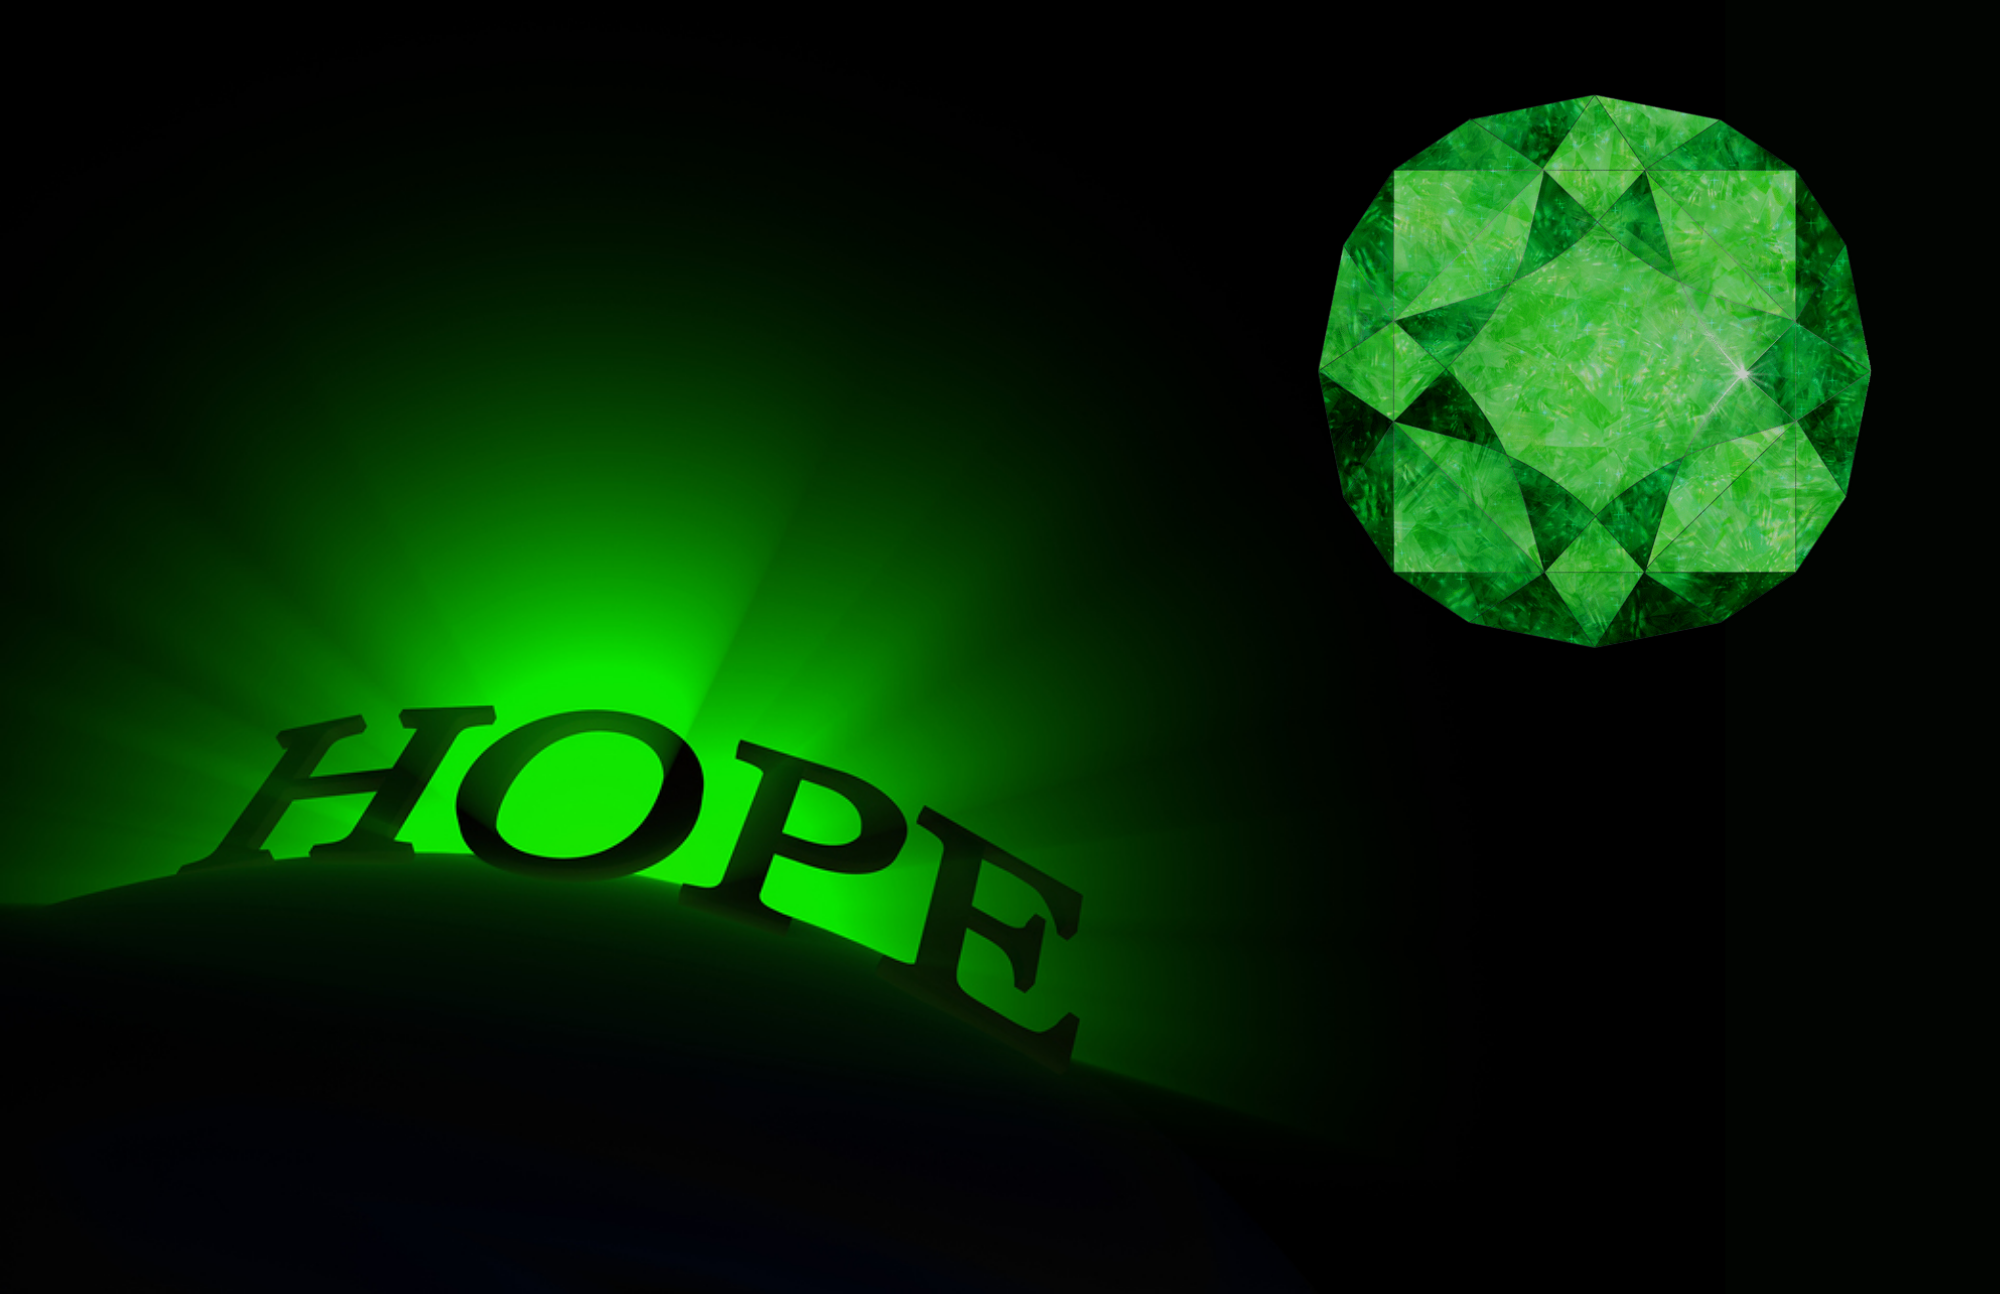 A silhouette of the word "HOPE" against a green light background and an emerald stone